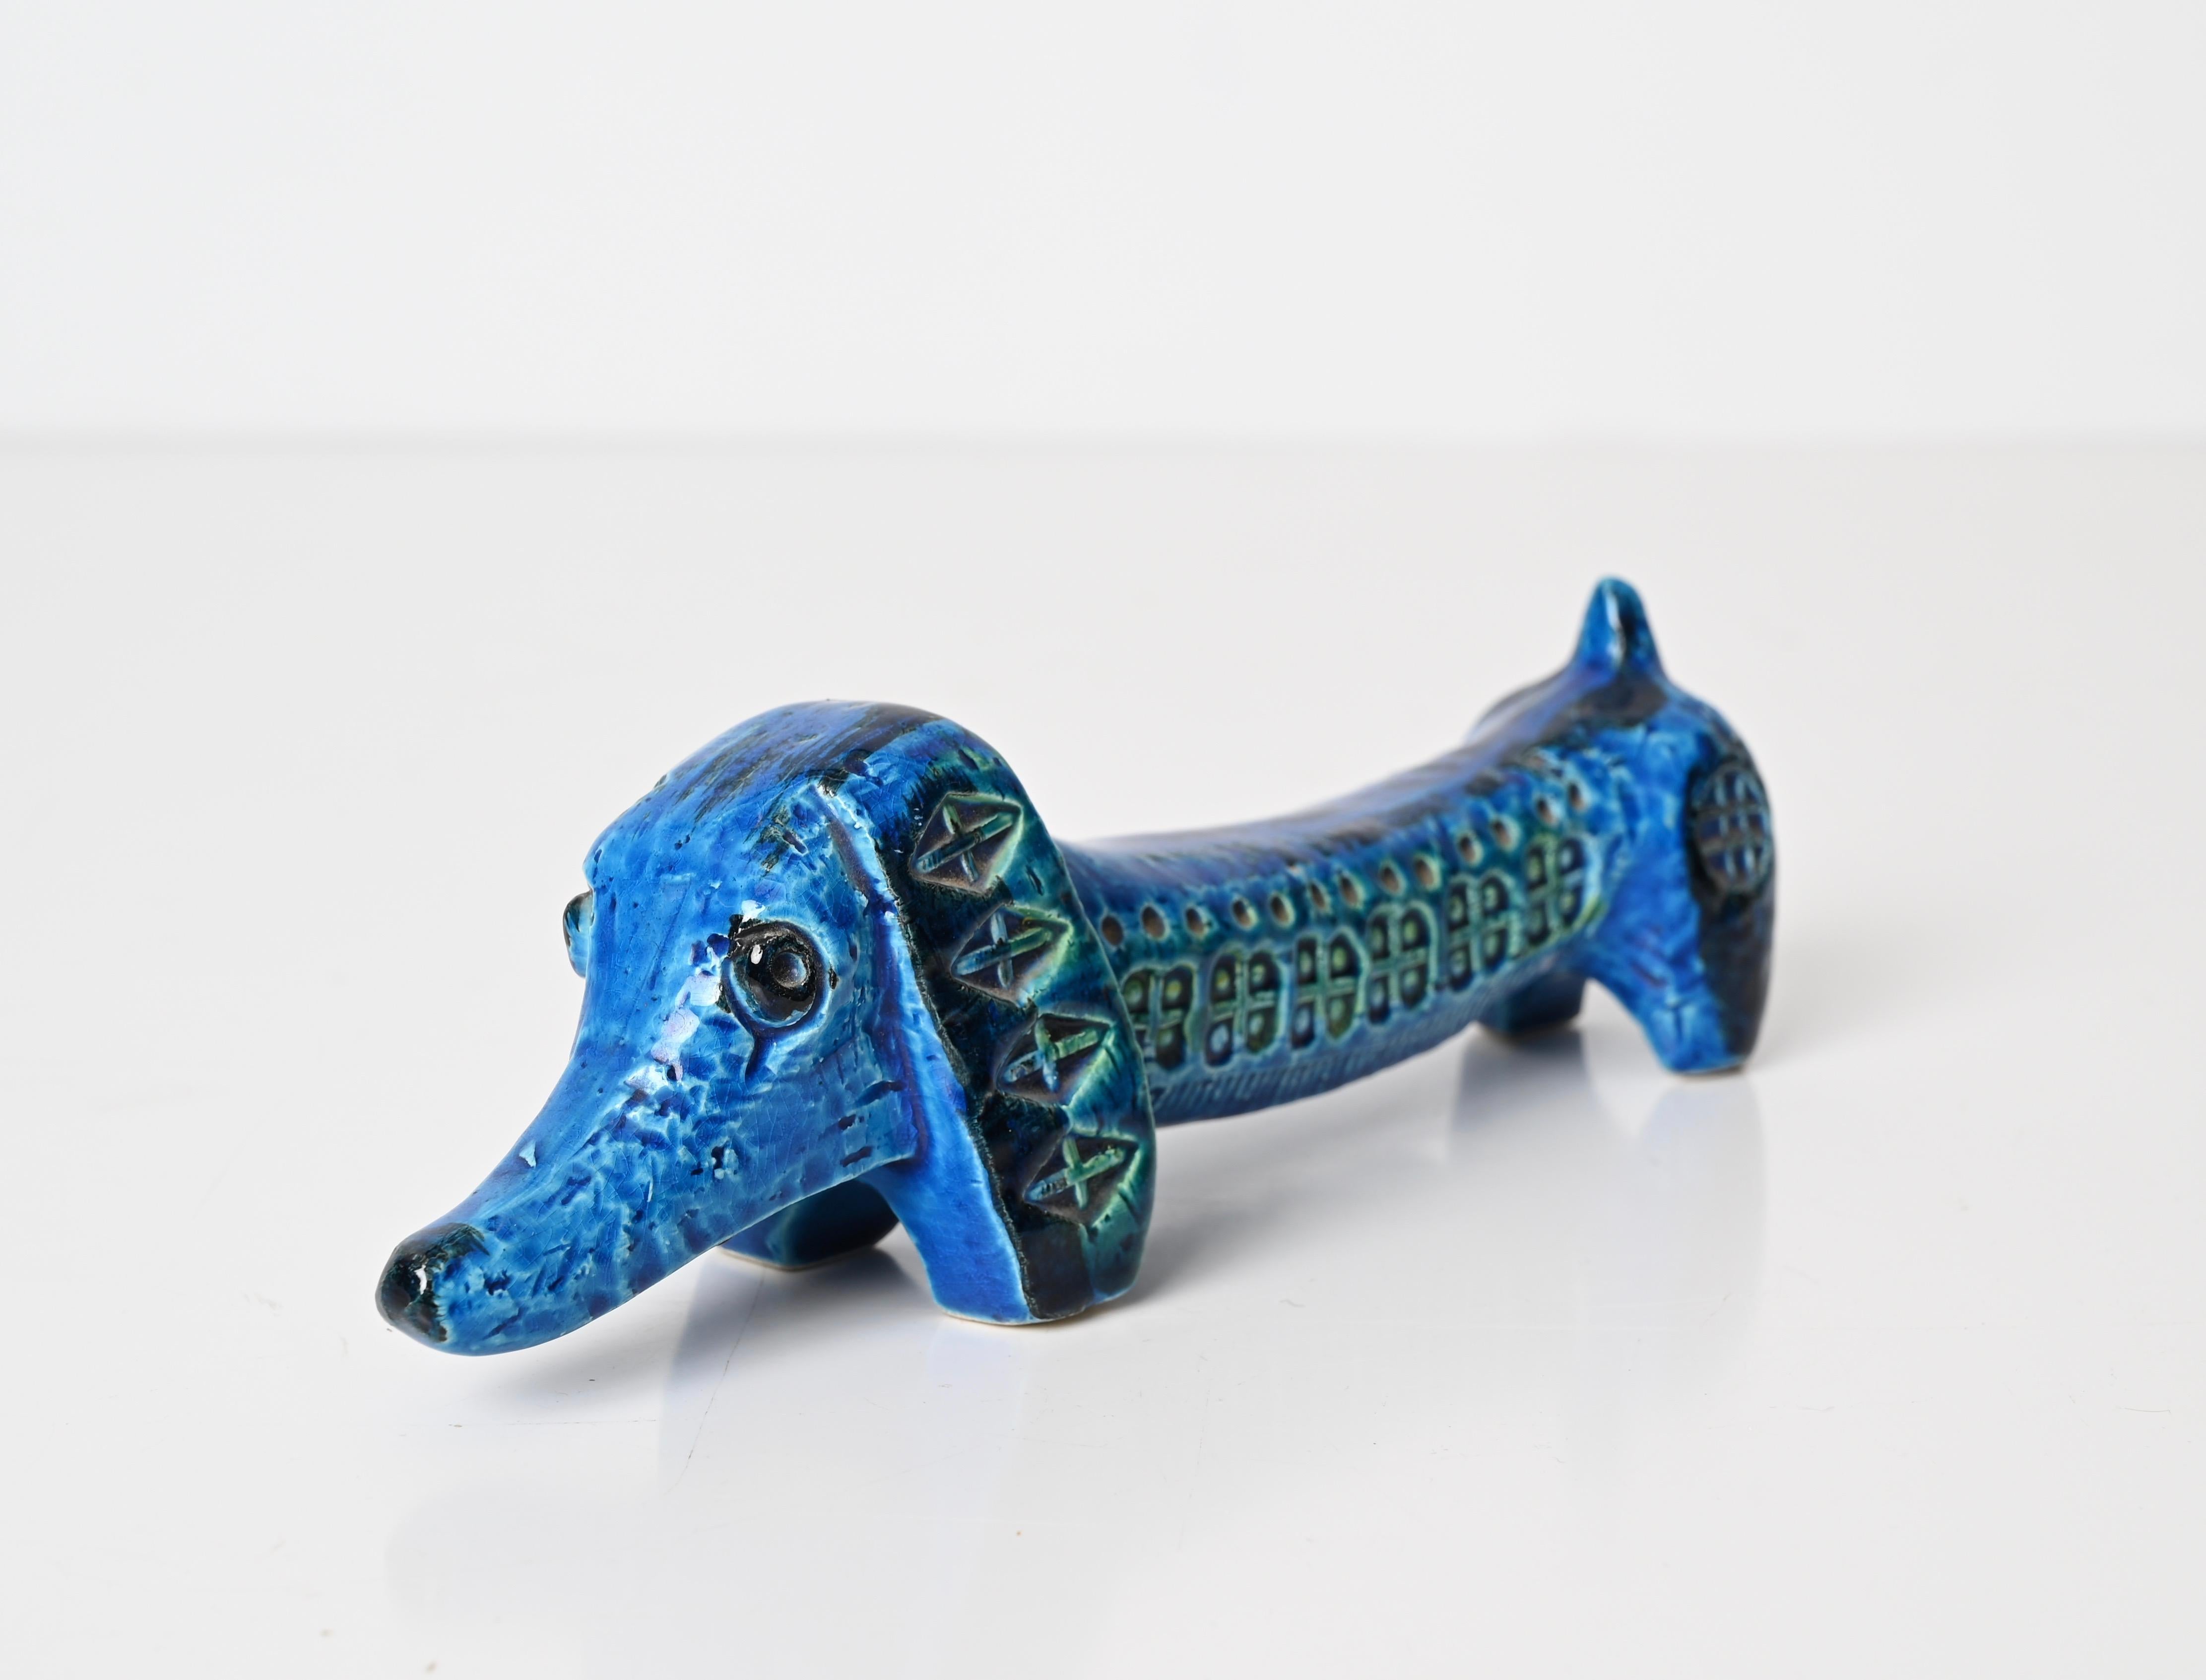 Gorgeous wiener dog sculpture from the 